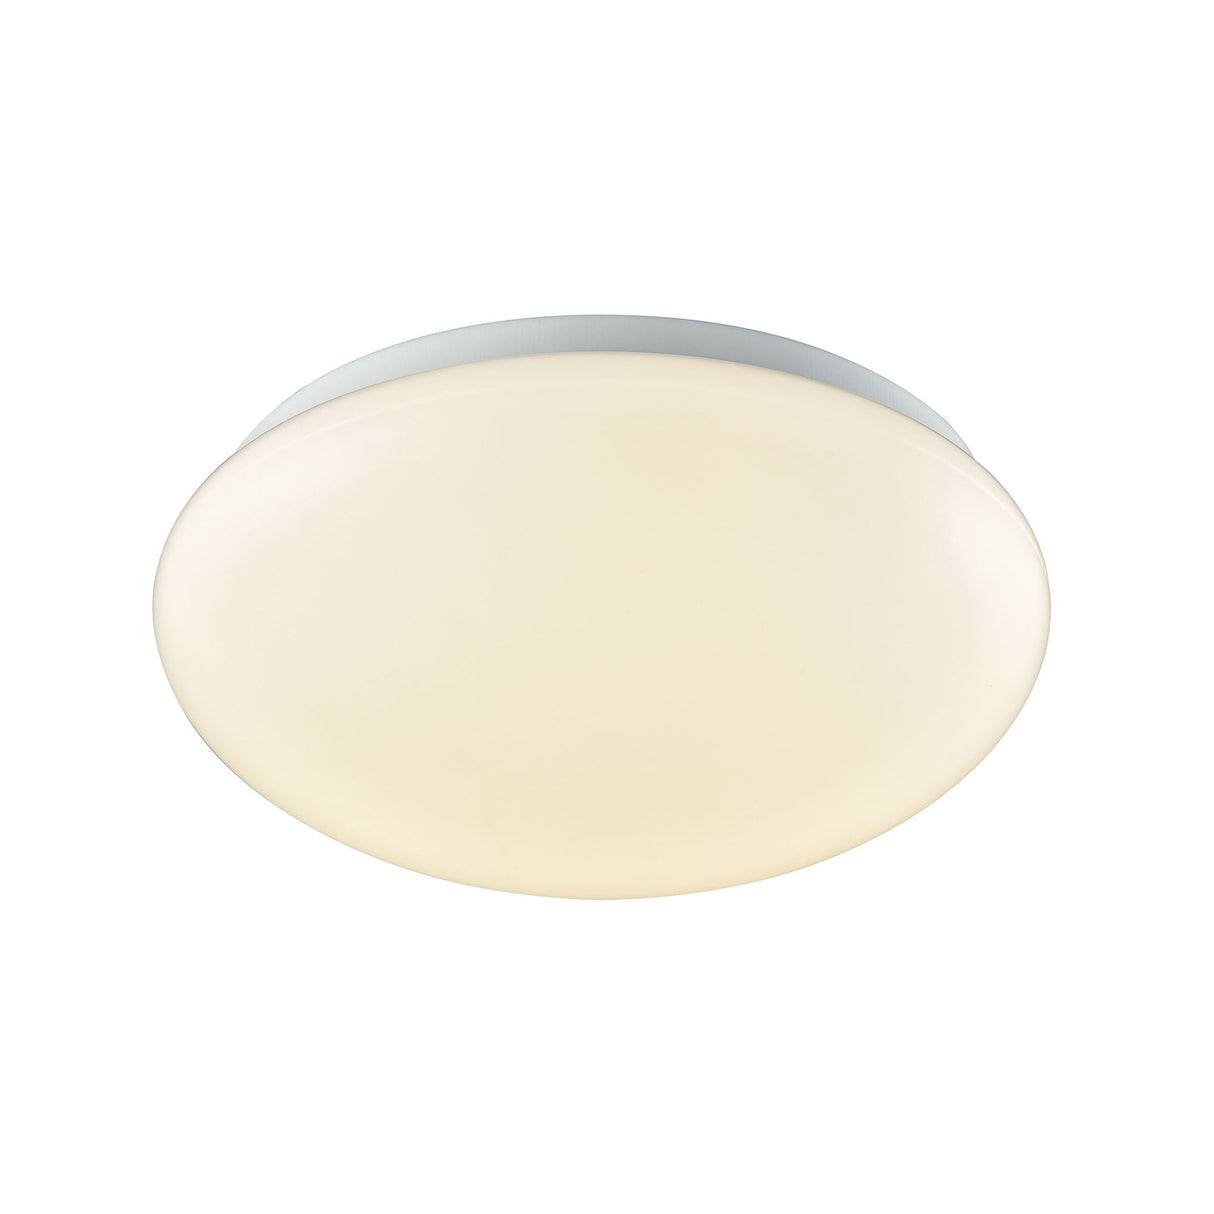 Elk CL783004 Kalona 1-Light 10-inch LED Flush Mount in White with a White Acrylic Diffuser